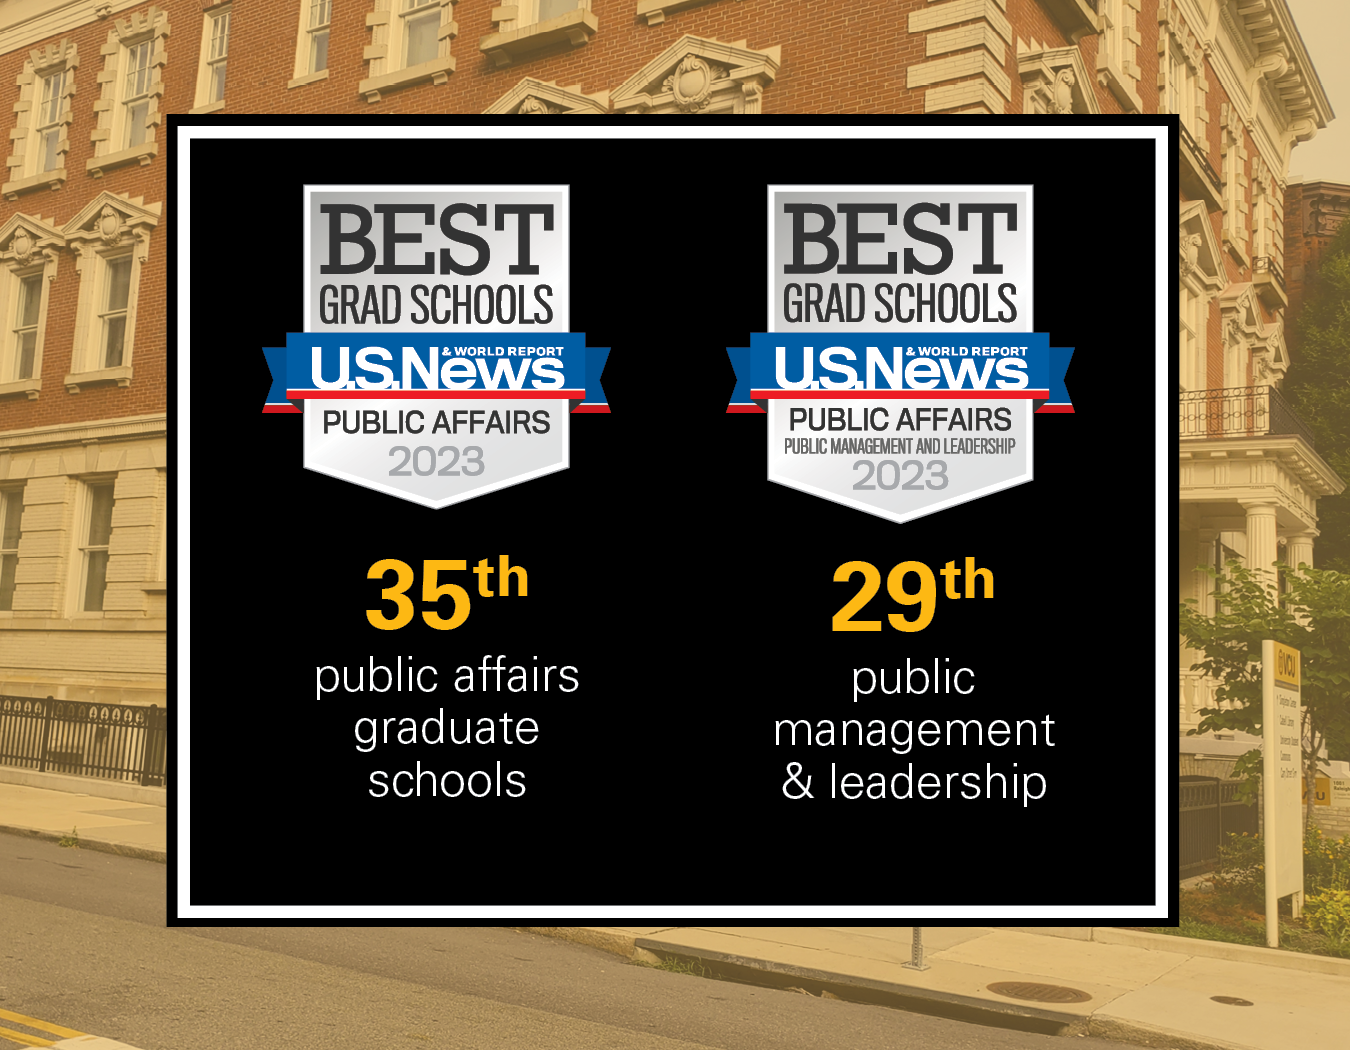 The 2023 US News & World Report Rankings reflect the growing national reputation at the Wilder School.